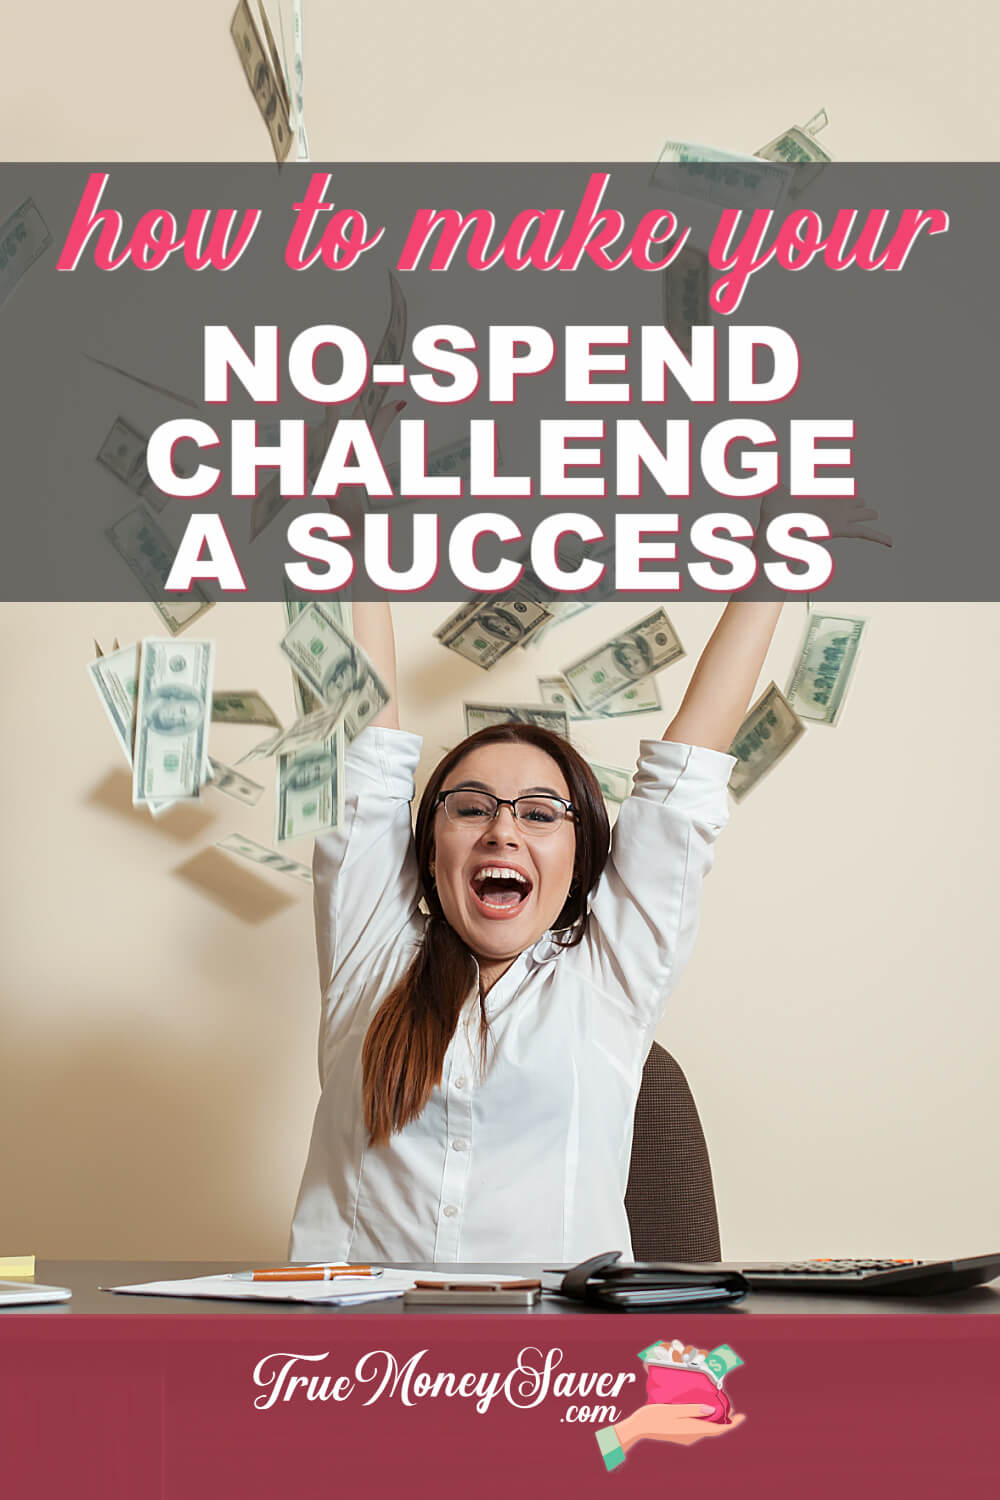 How To Make Your No-Spend Challenge A Success This Year